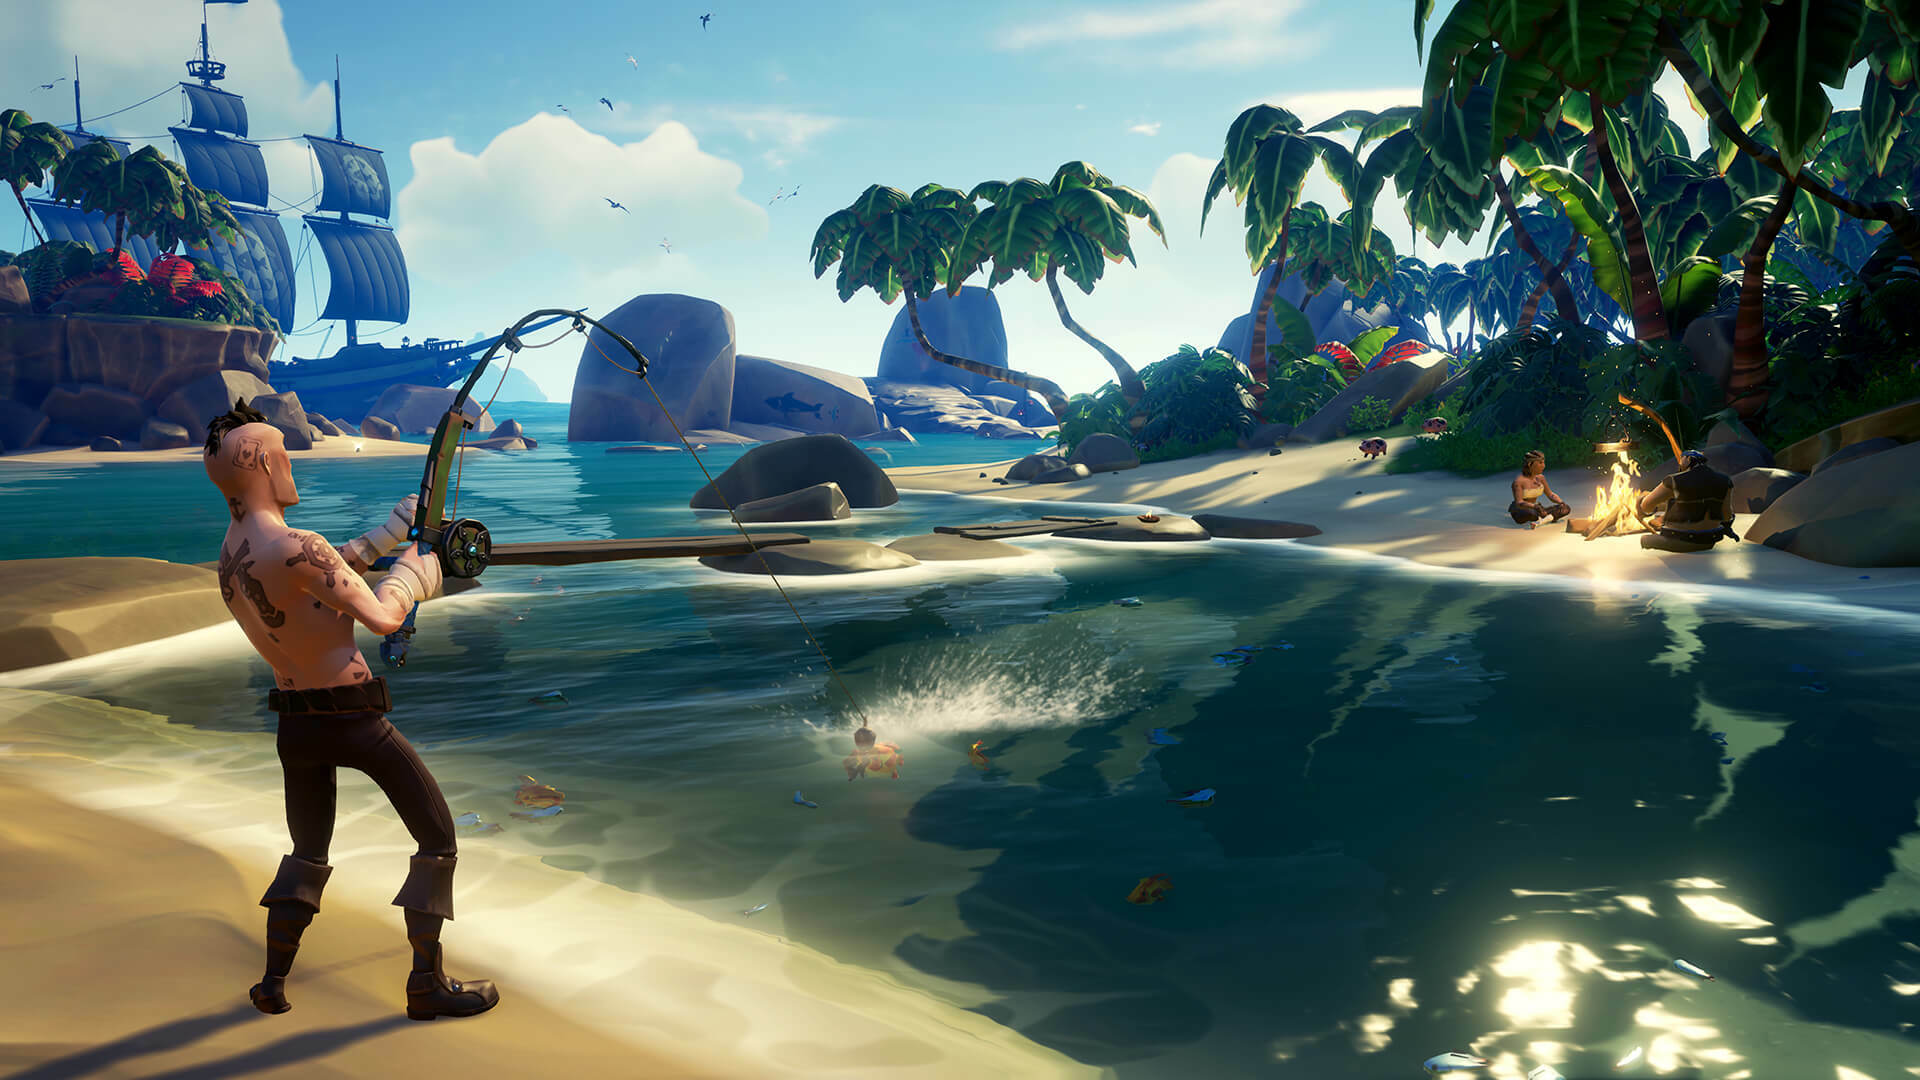 Sea of Thieves wraps up its Monkey Island crossover with The Lair